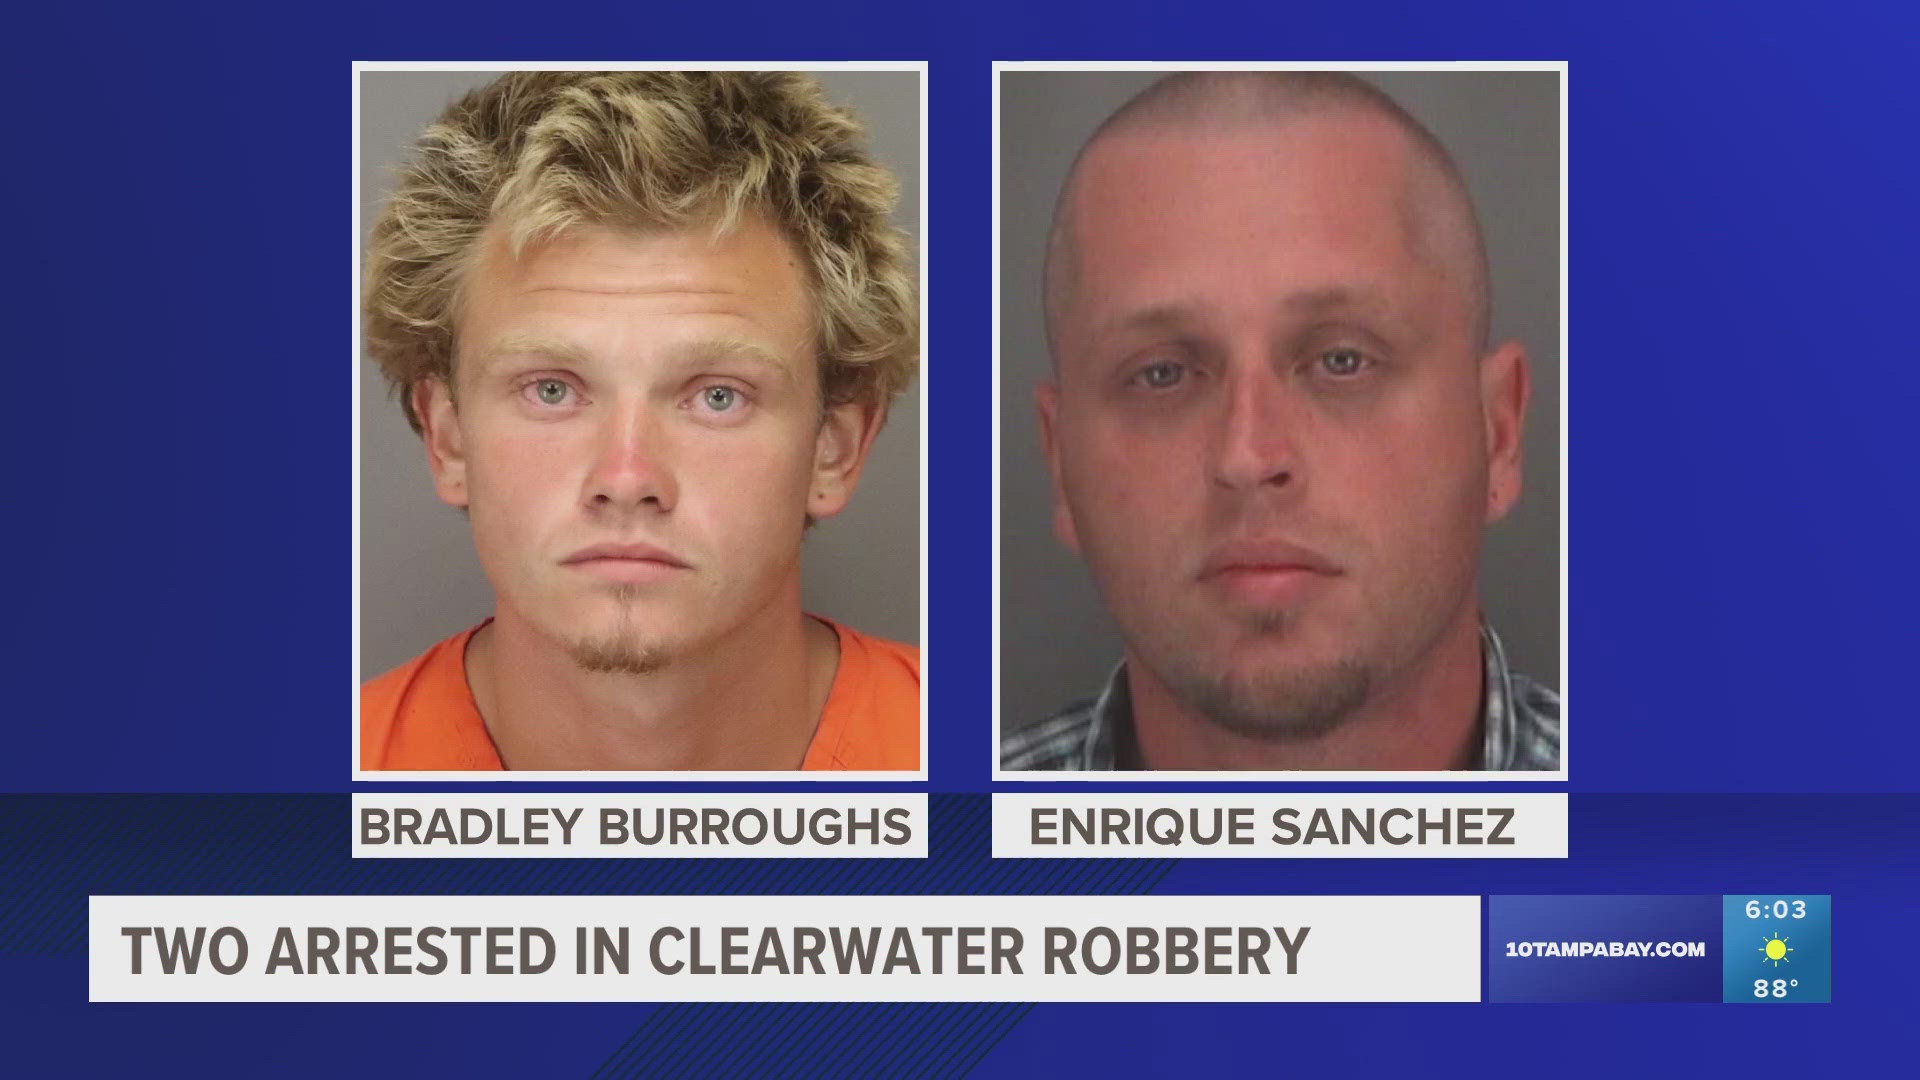 Police say Bradley Burroughs and Enrique Sanchez followed the teen for several blocks before running him off the road.